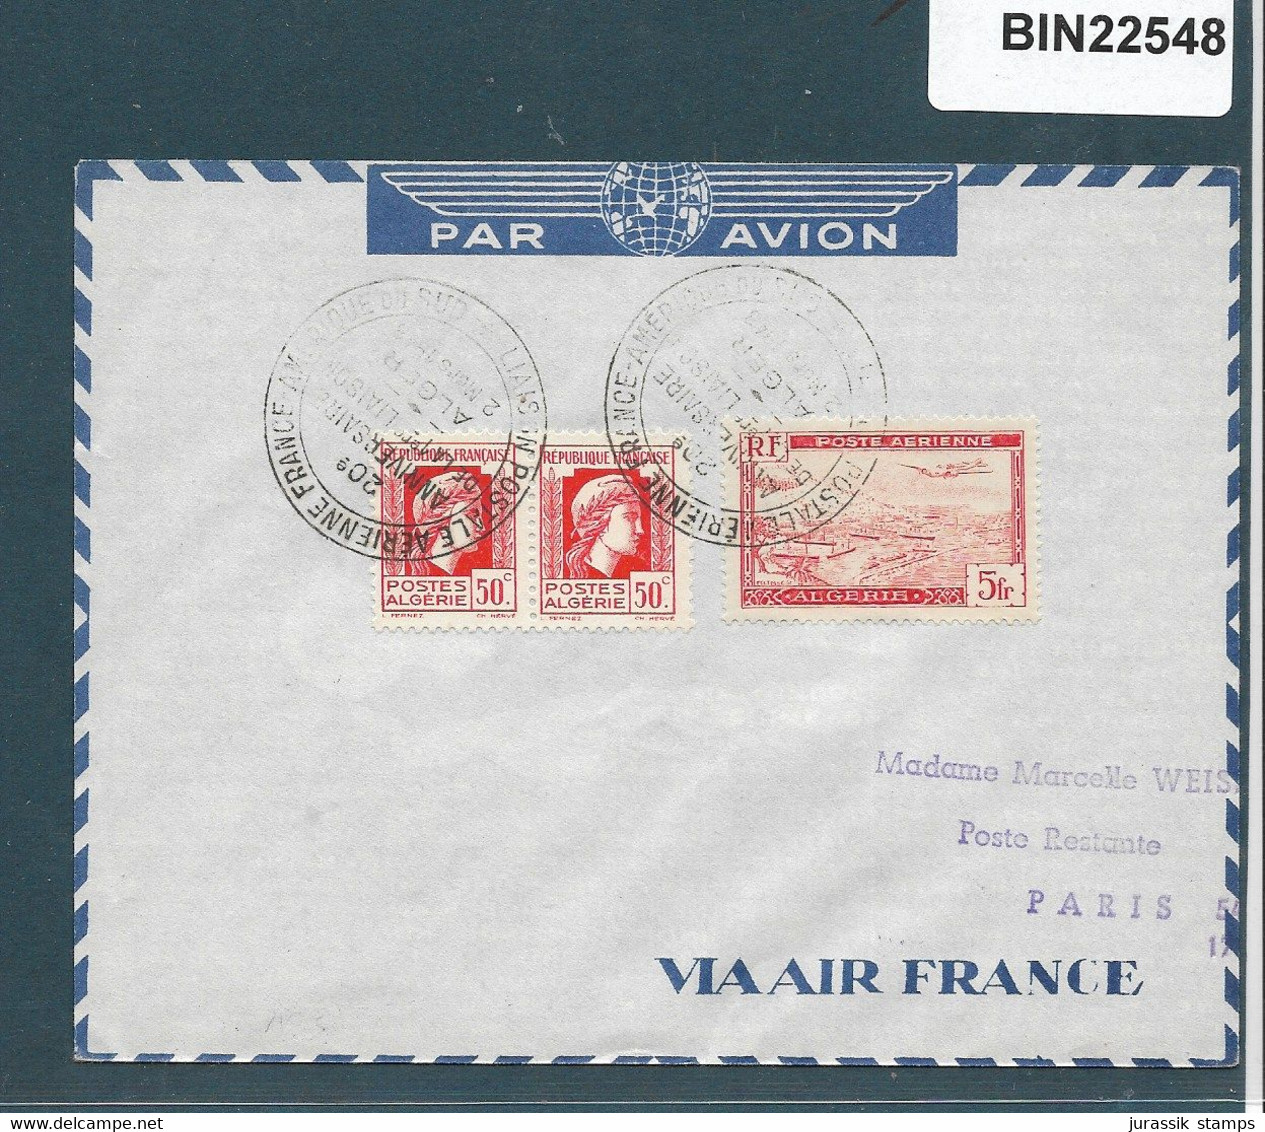 ALGERIA  - 1948 AIR FRANCE FFC - 20TH ANNIVERSARY 1ST FLIGHT TO SOUTH AMERICA   - 22548 - Covers & Documents